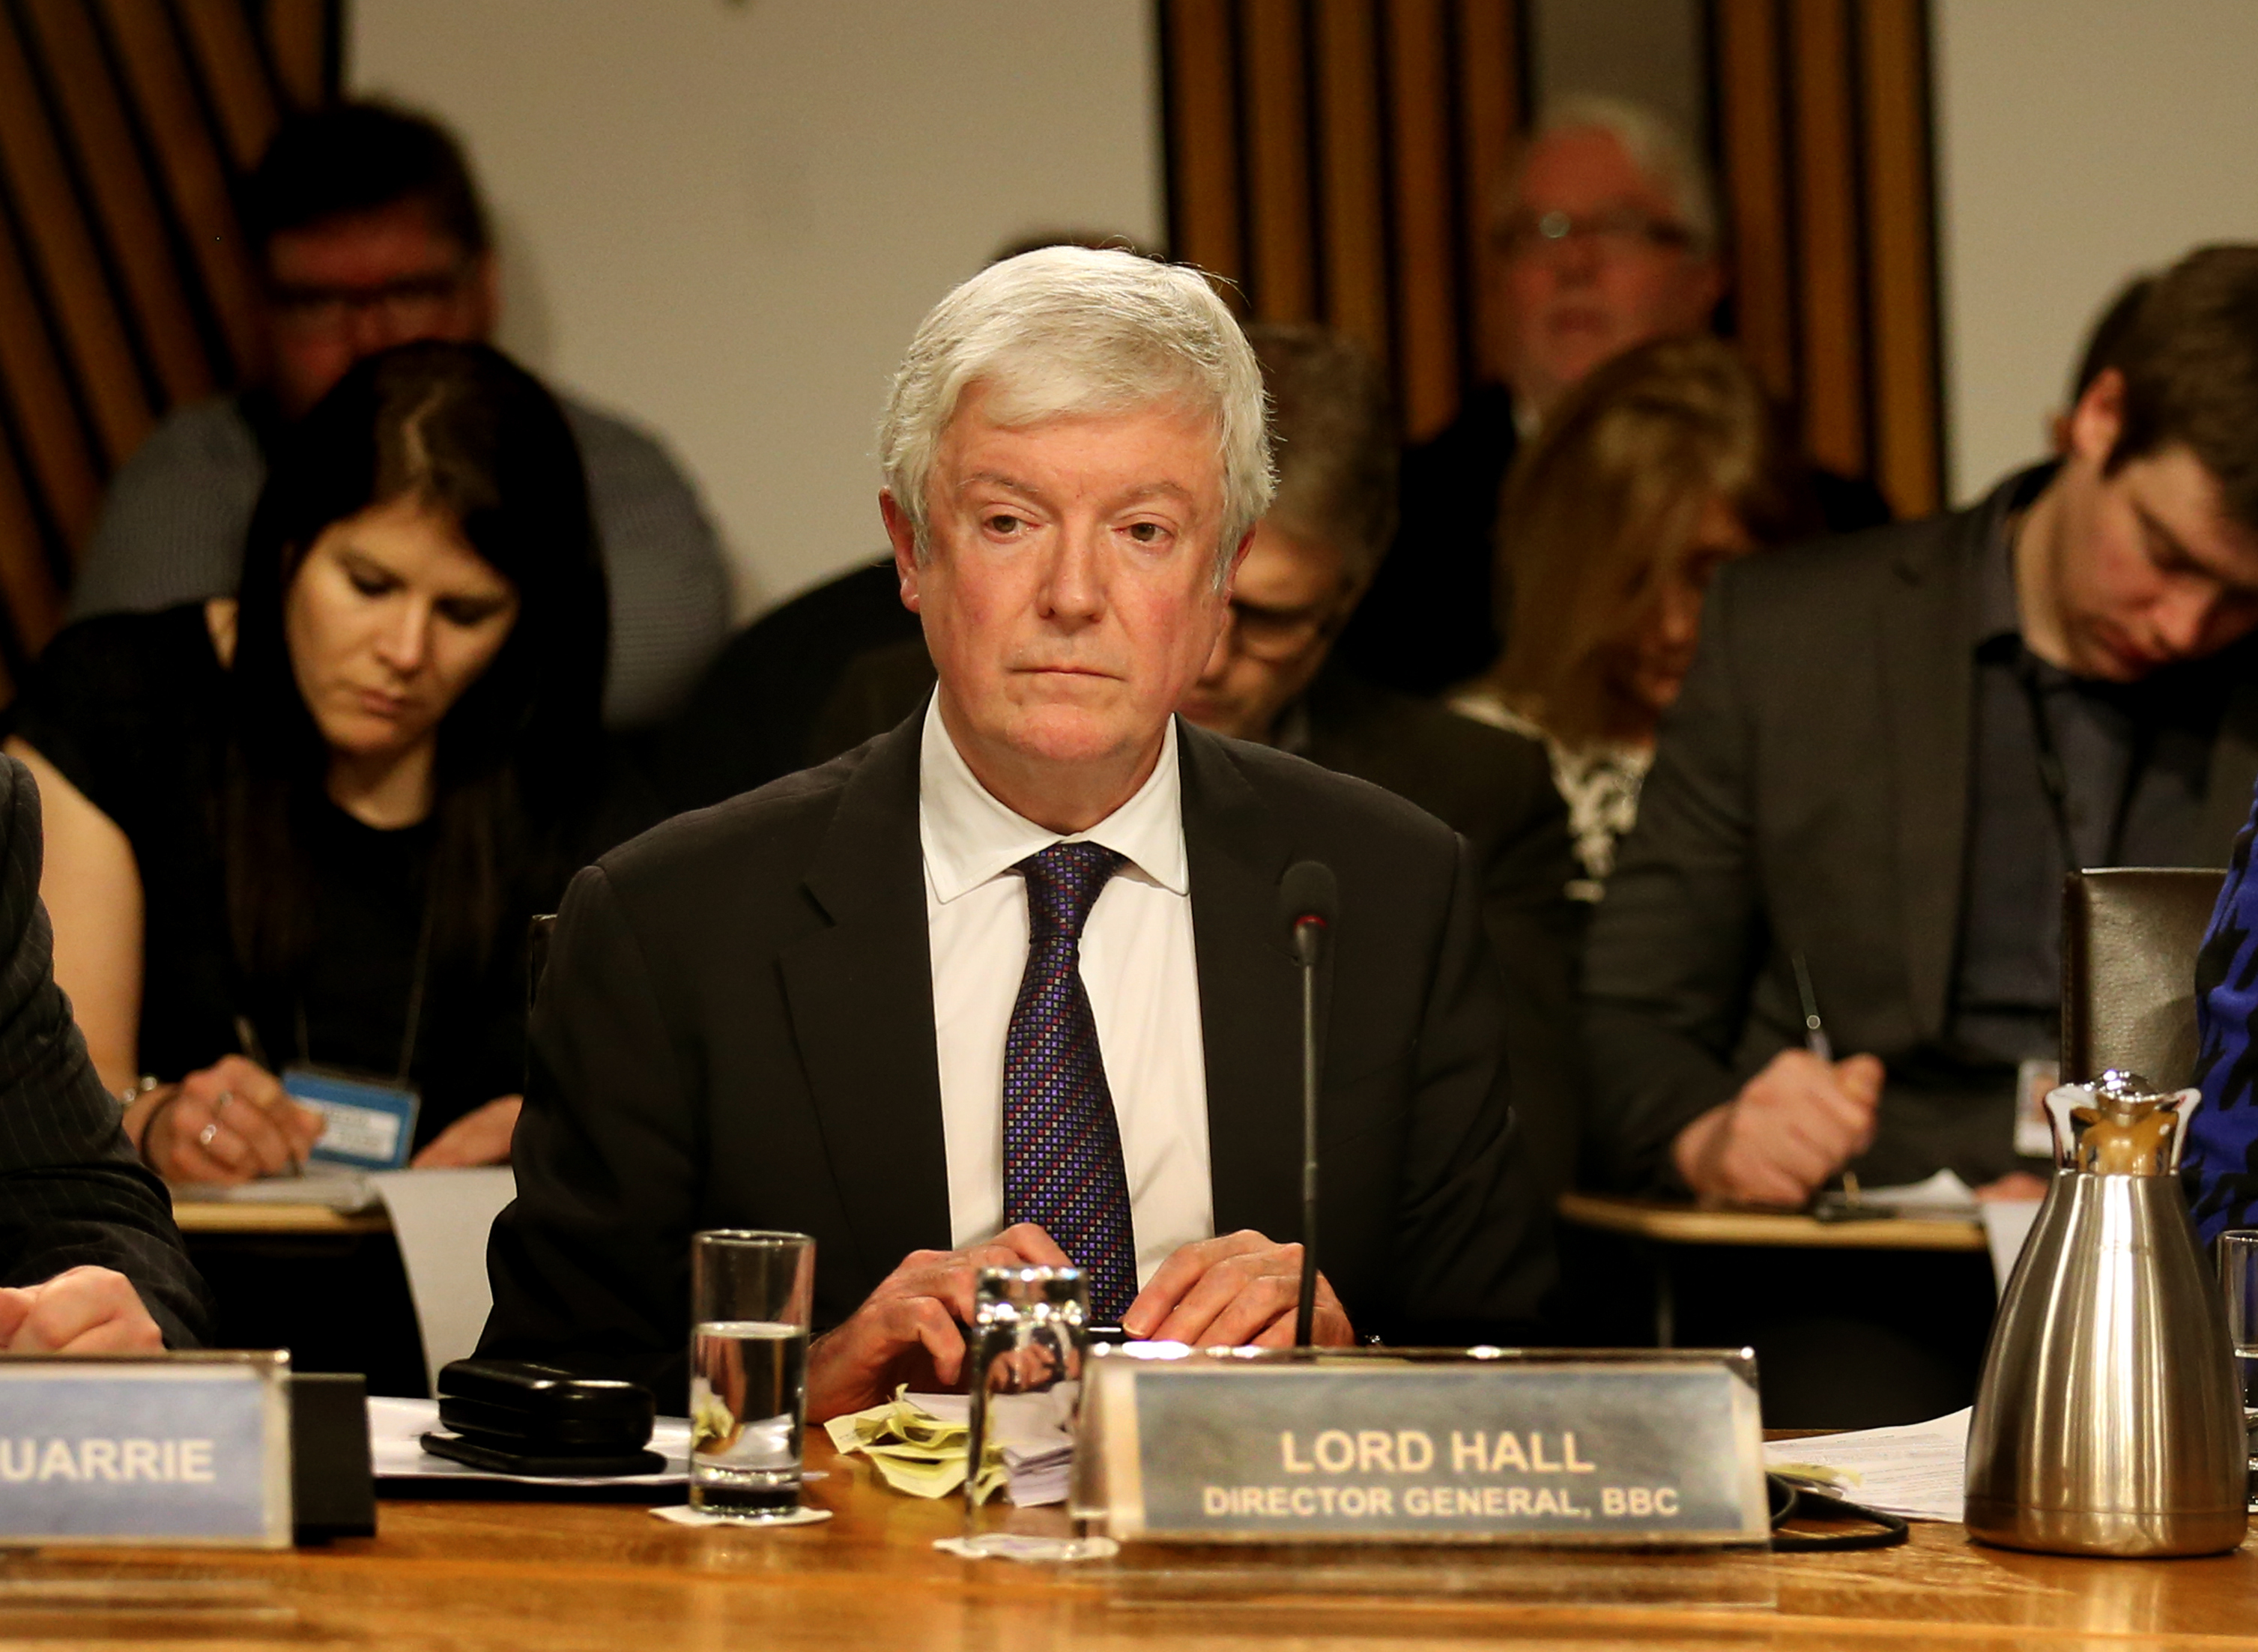 Lord Hall vowed to close the gender pay gap at the BBC (Andrew Milligan/PA)